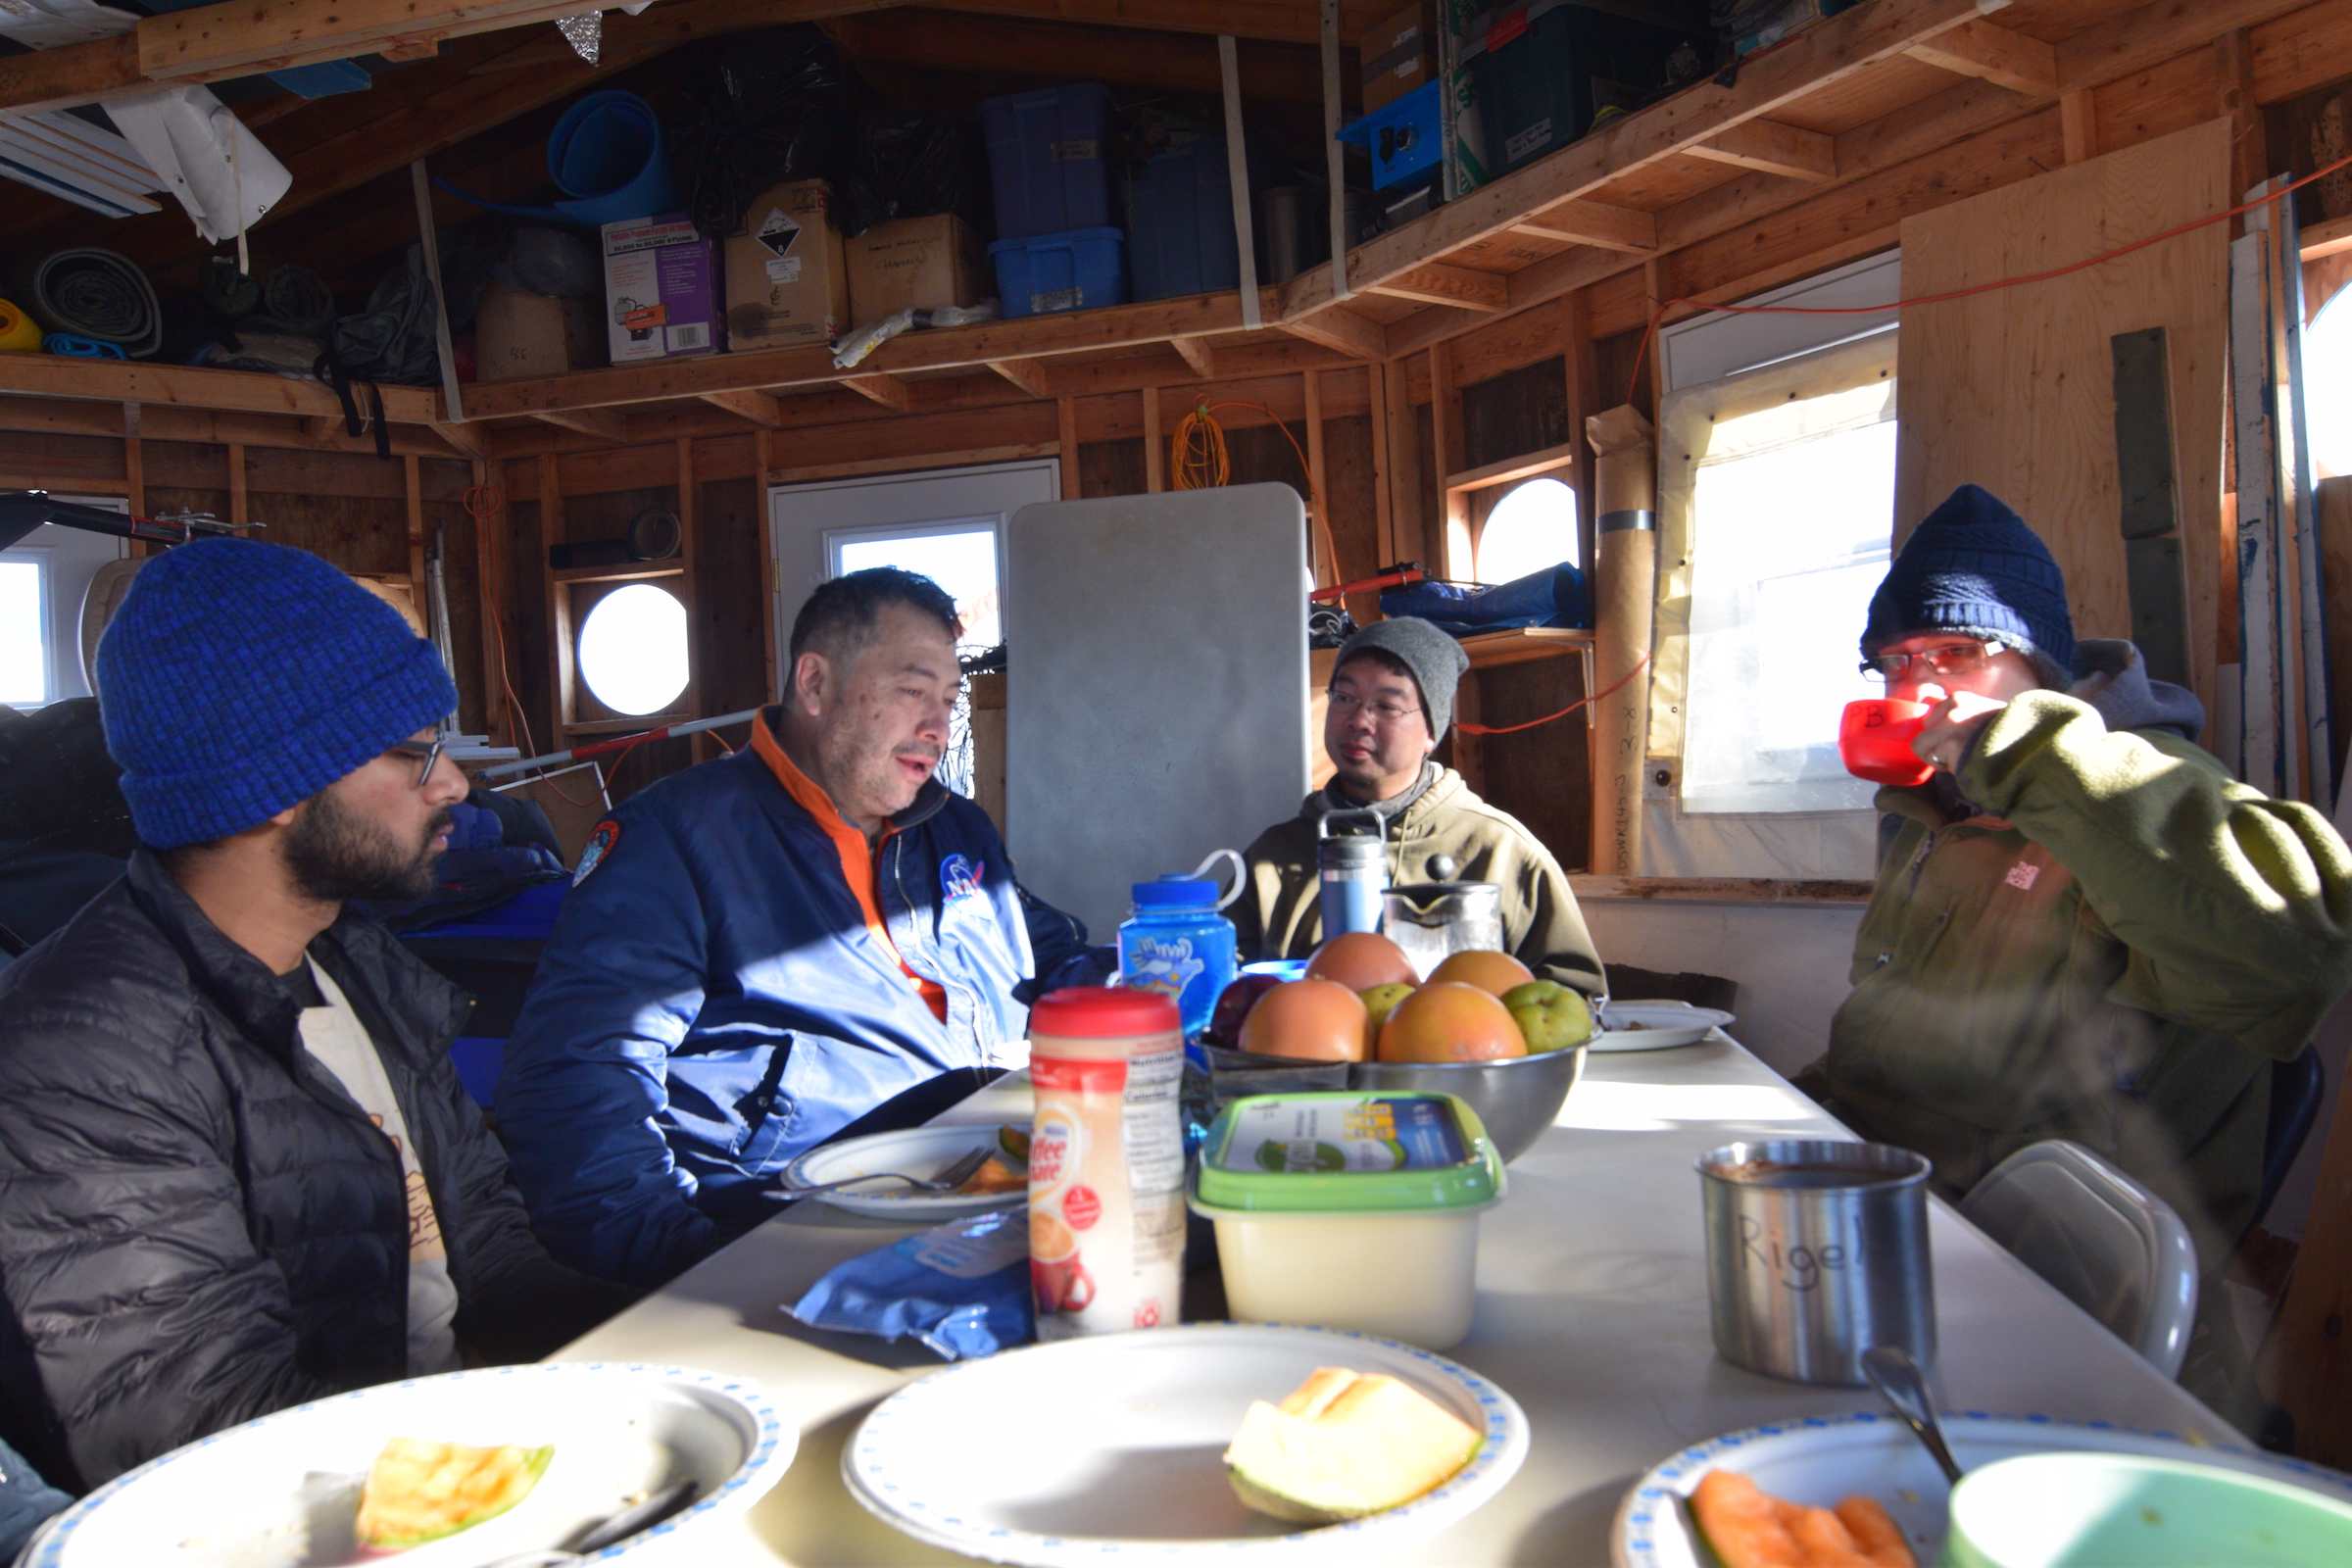 Men in coats and winter hats play cards inside an Arctic base camp structure.